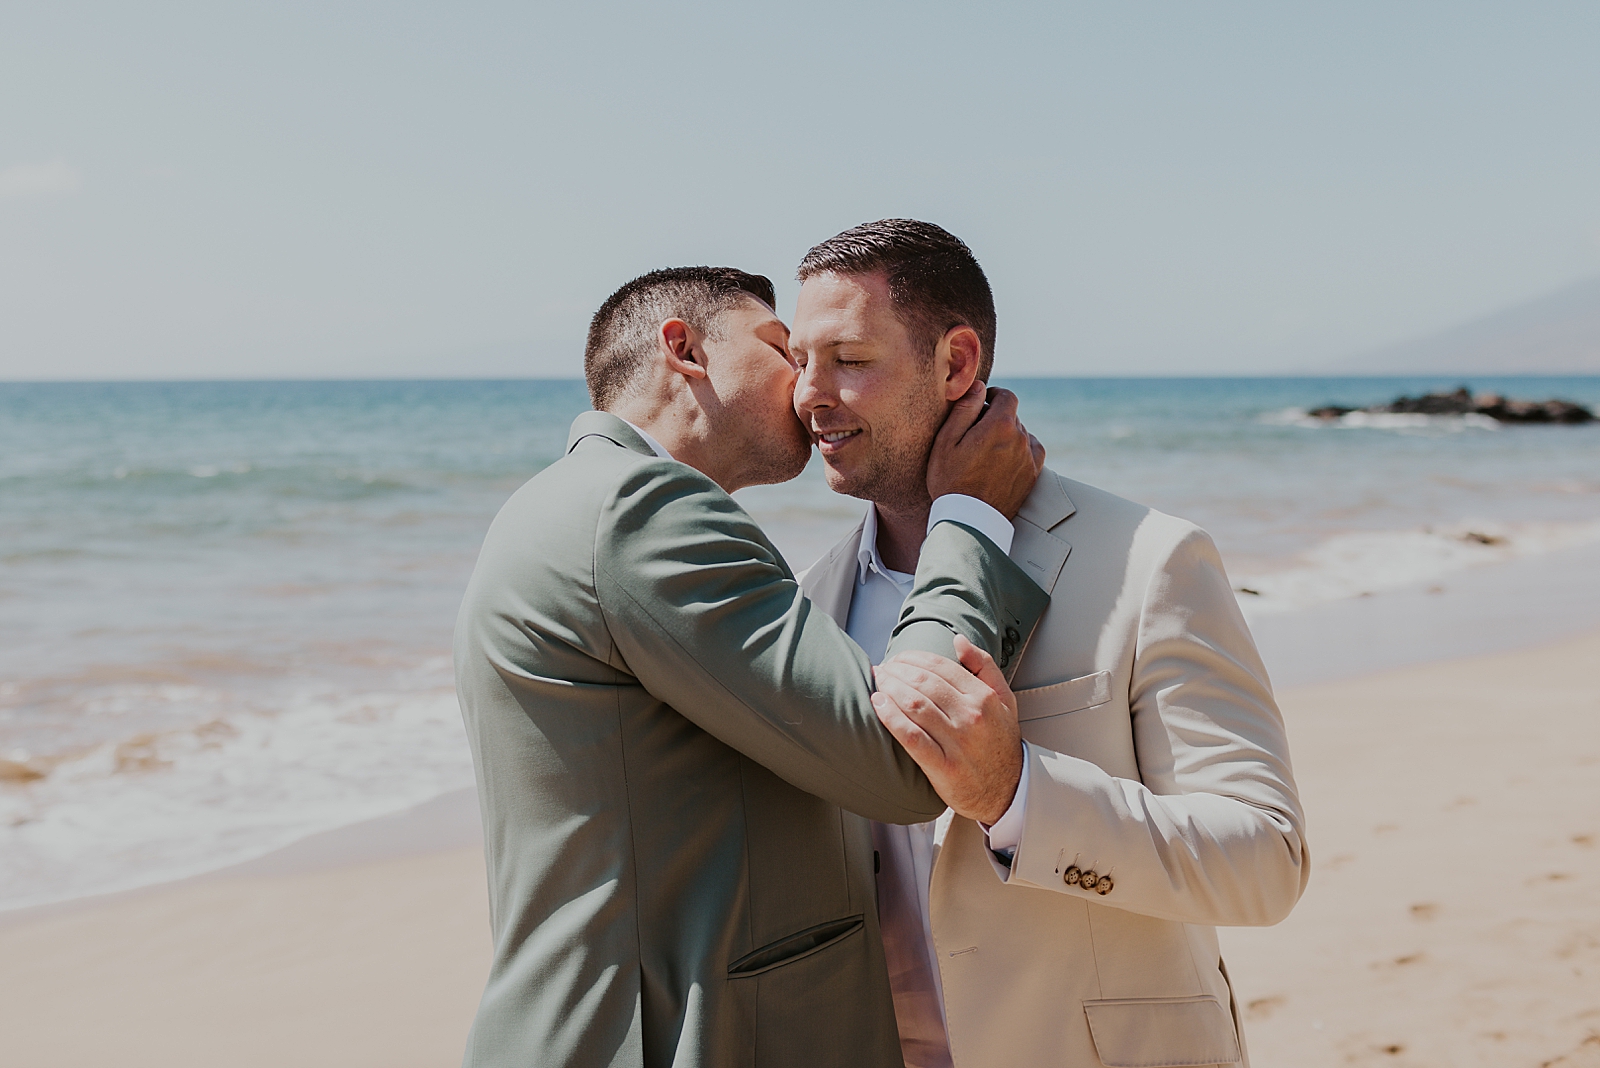 Groom kissing Groom on the cheek while standing out on the beach